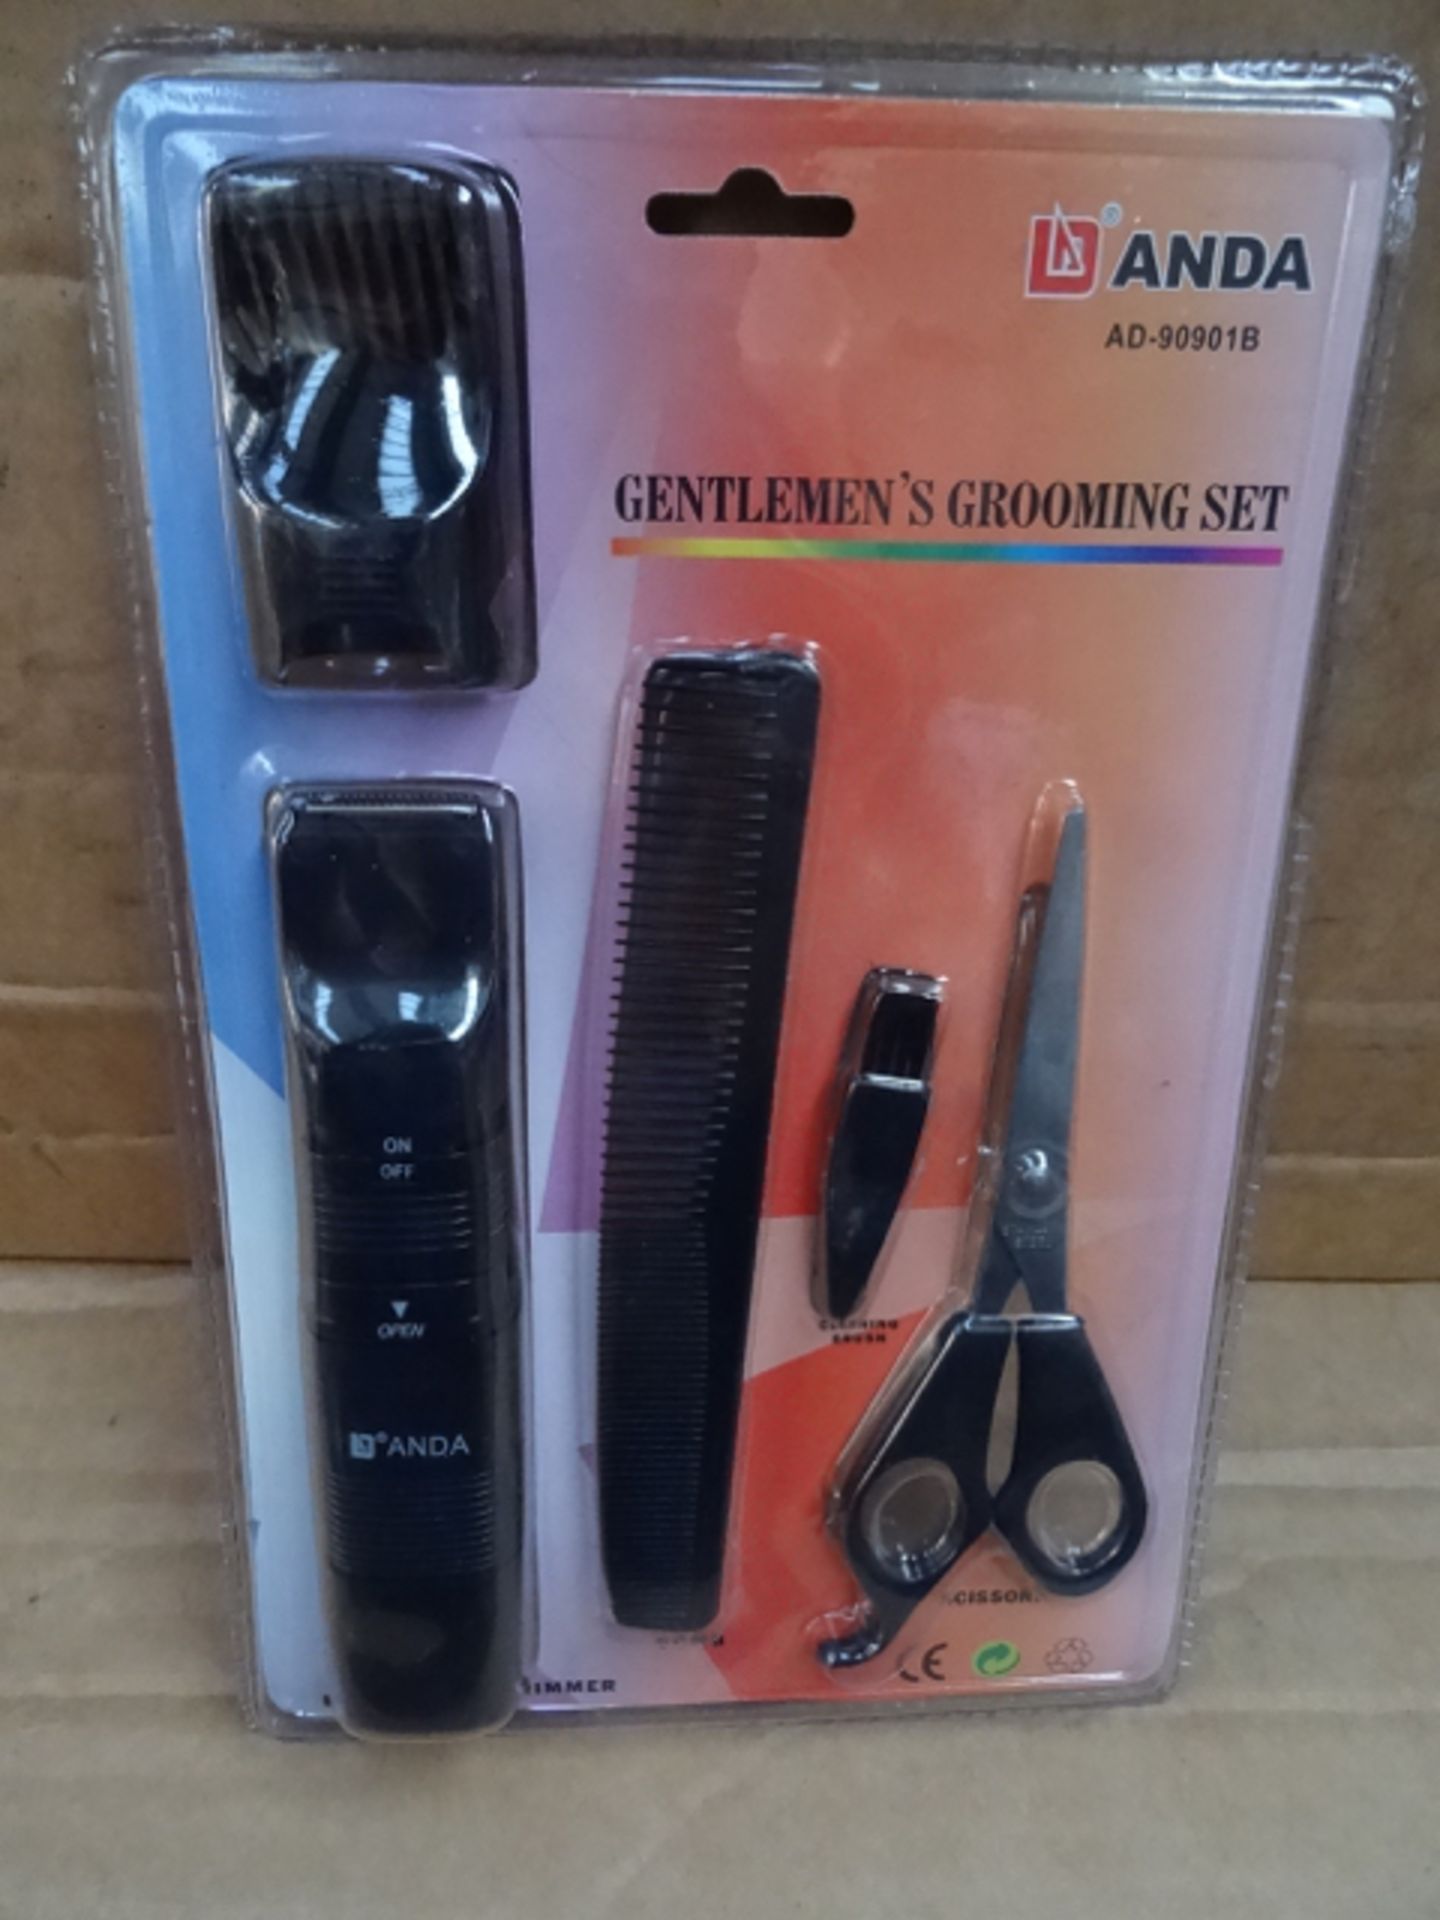 24 x Anda GENTLEMENS GROOMING SET (AD-90901B) INCLUDES: BATTERY POWERED BEARD AND HAIR TRIMMER,